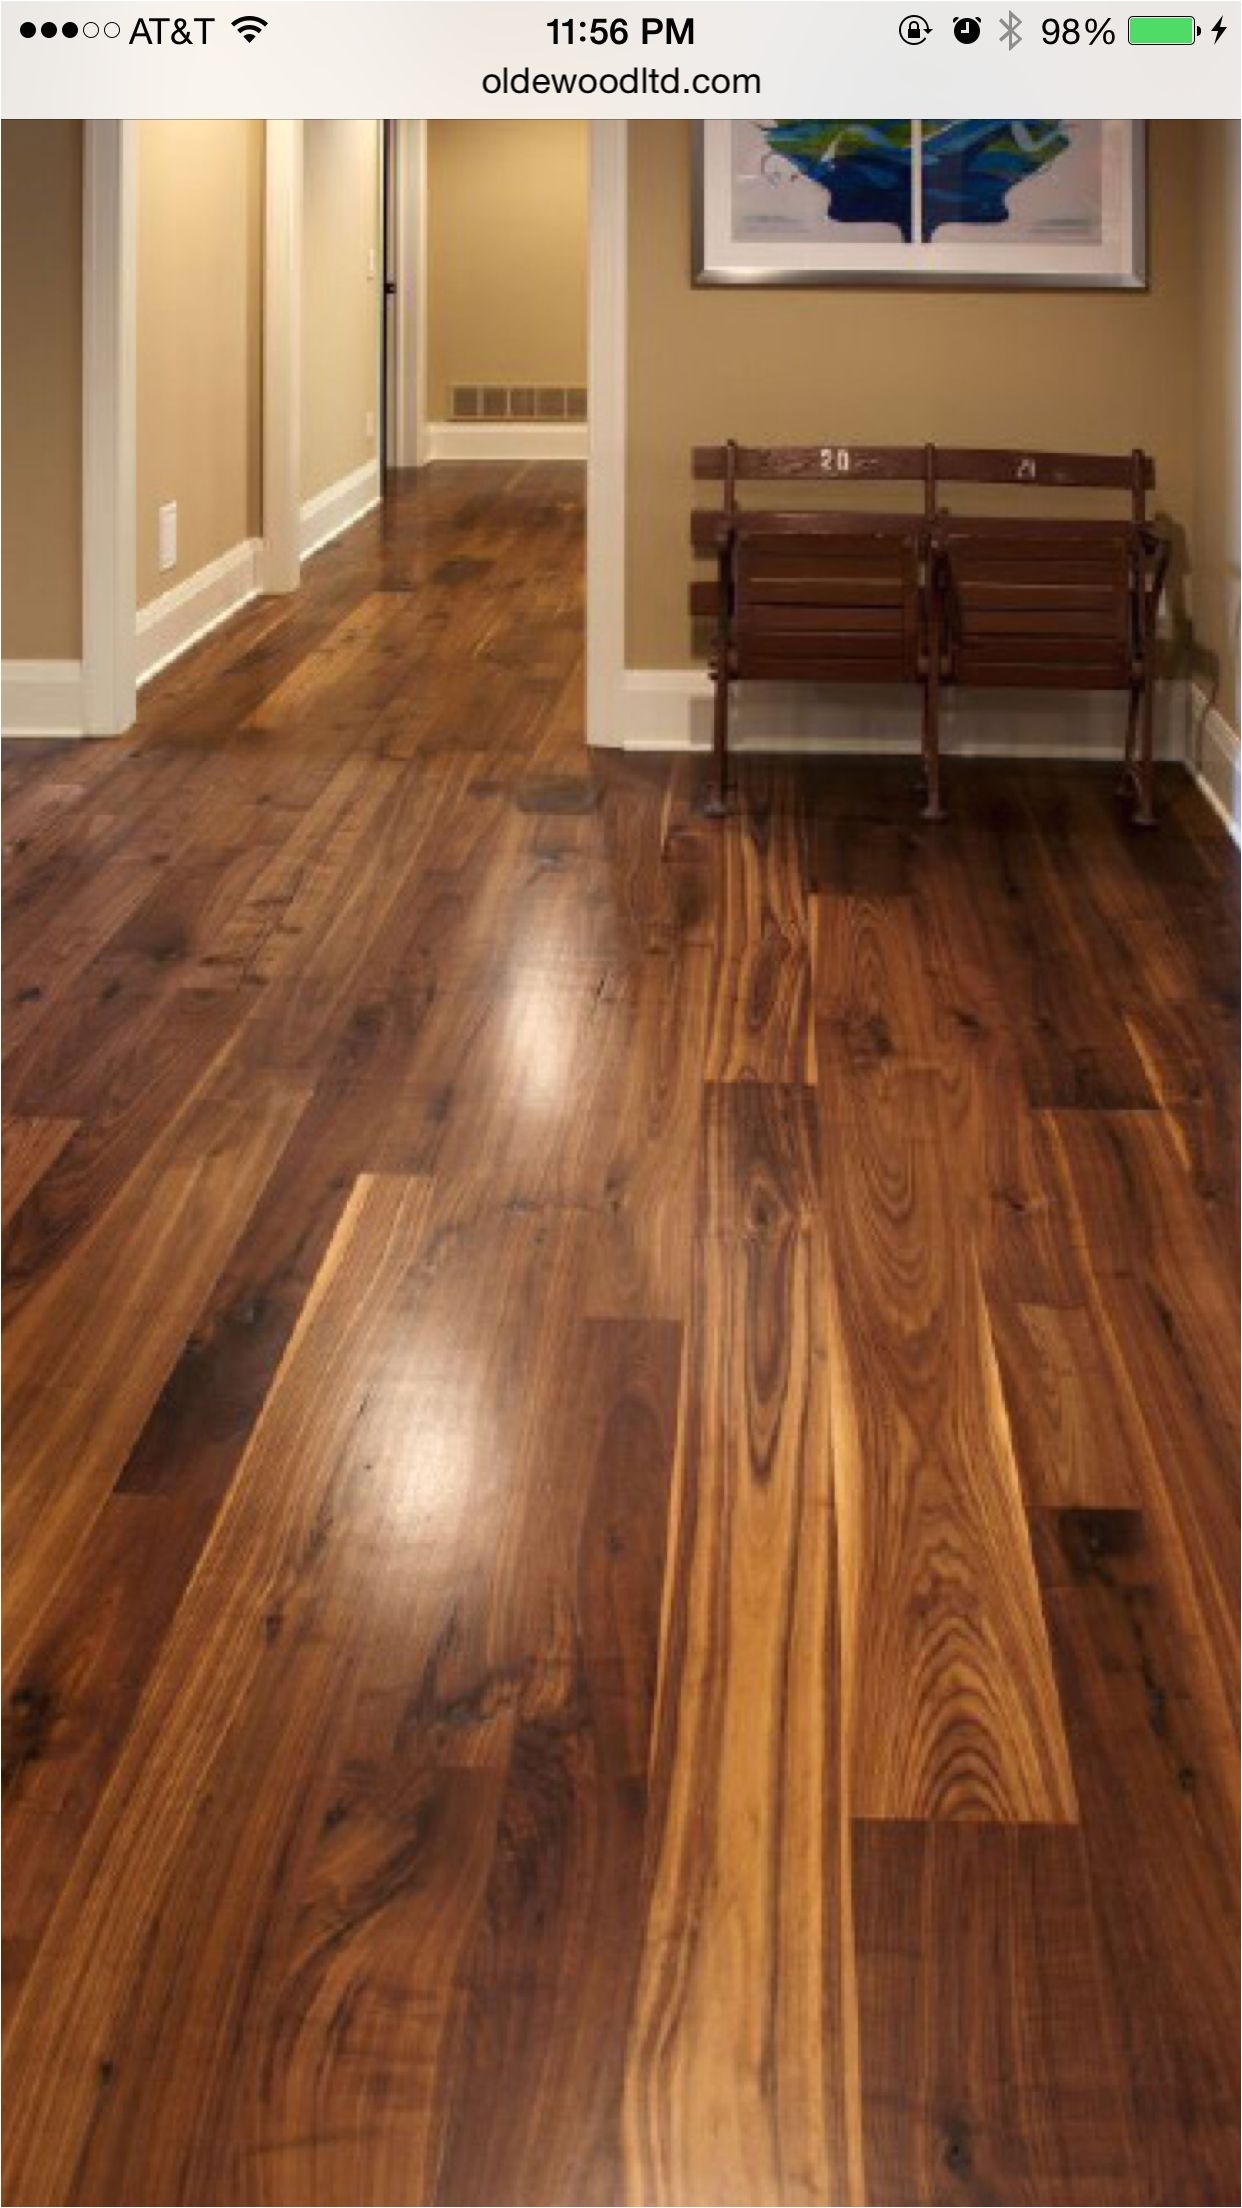 olde wood s wide plank walnut flooring is traditionally milled into premium wood flooring planks with a much higher quality and appeal than standard strip